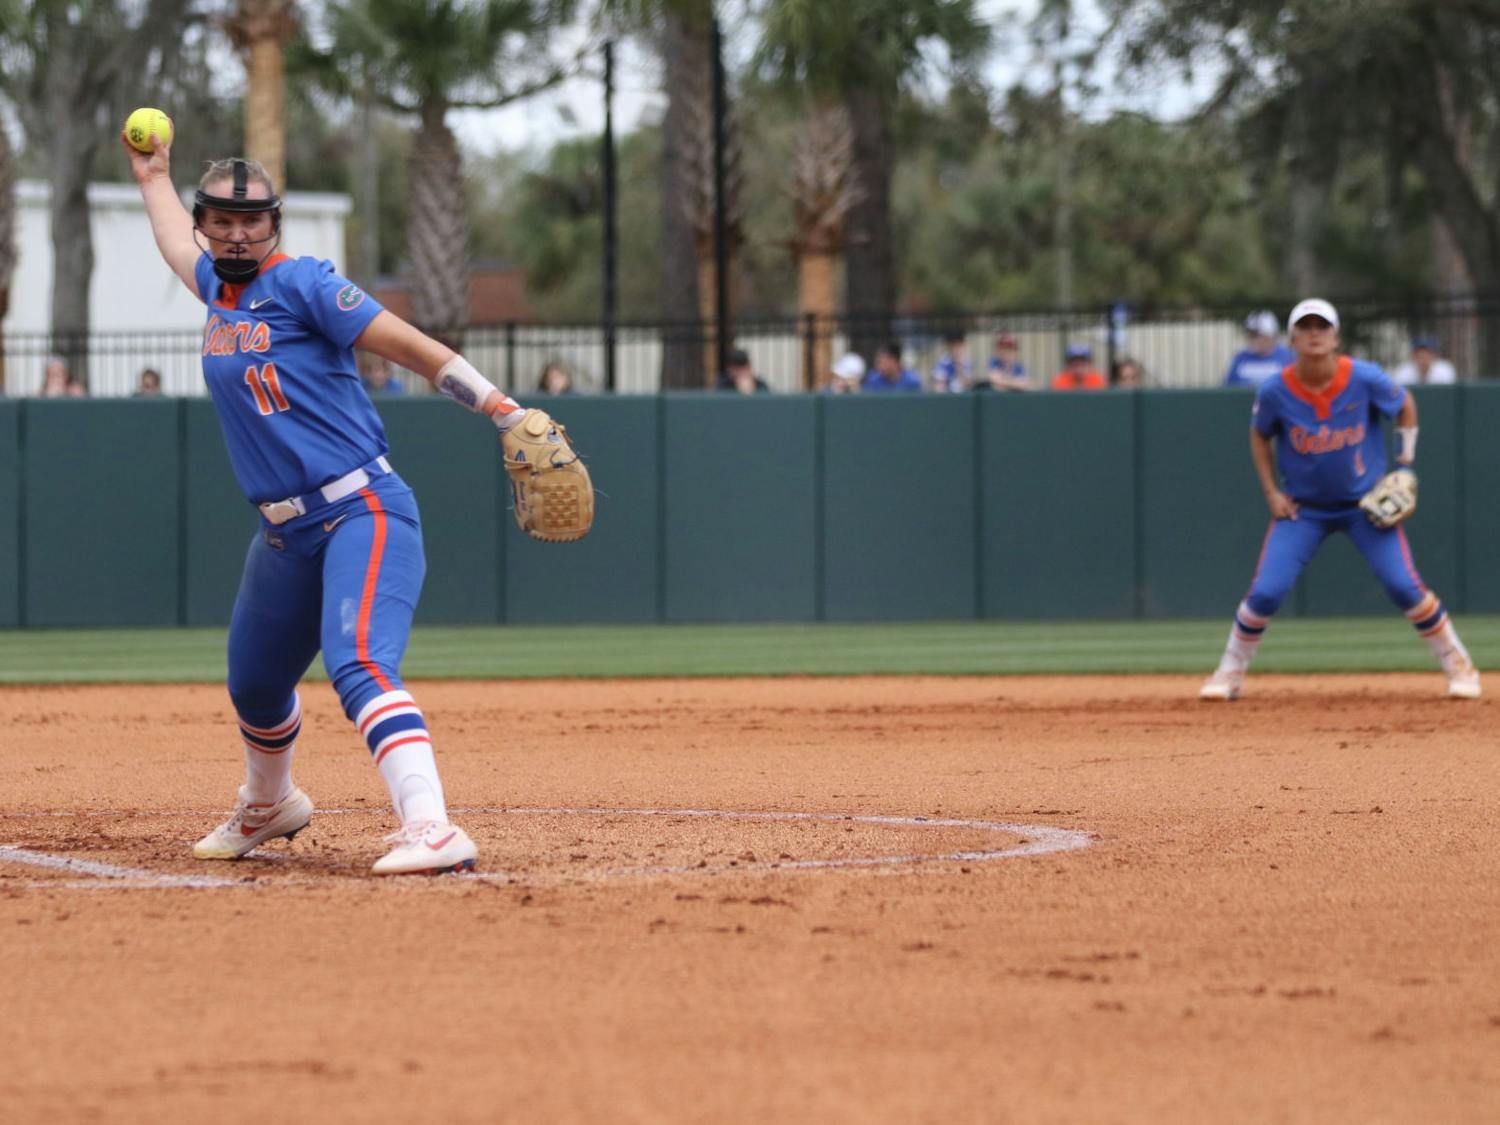 Senior Kelly Barnhill pitched a complete-game shutout in the Gators 5-0 win against UCF on Wednesday.